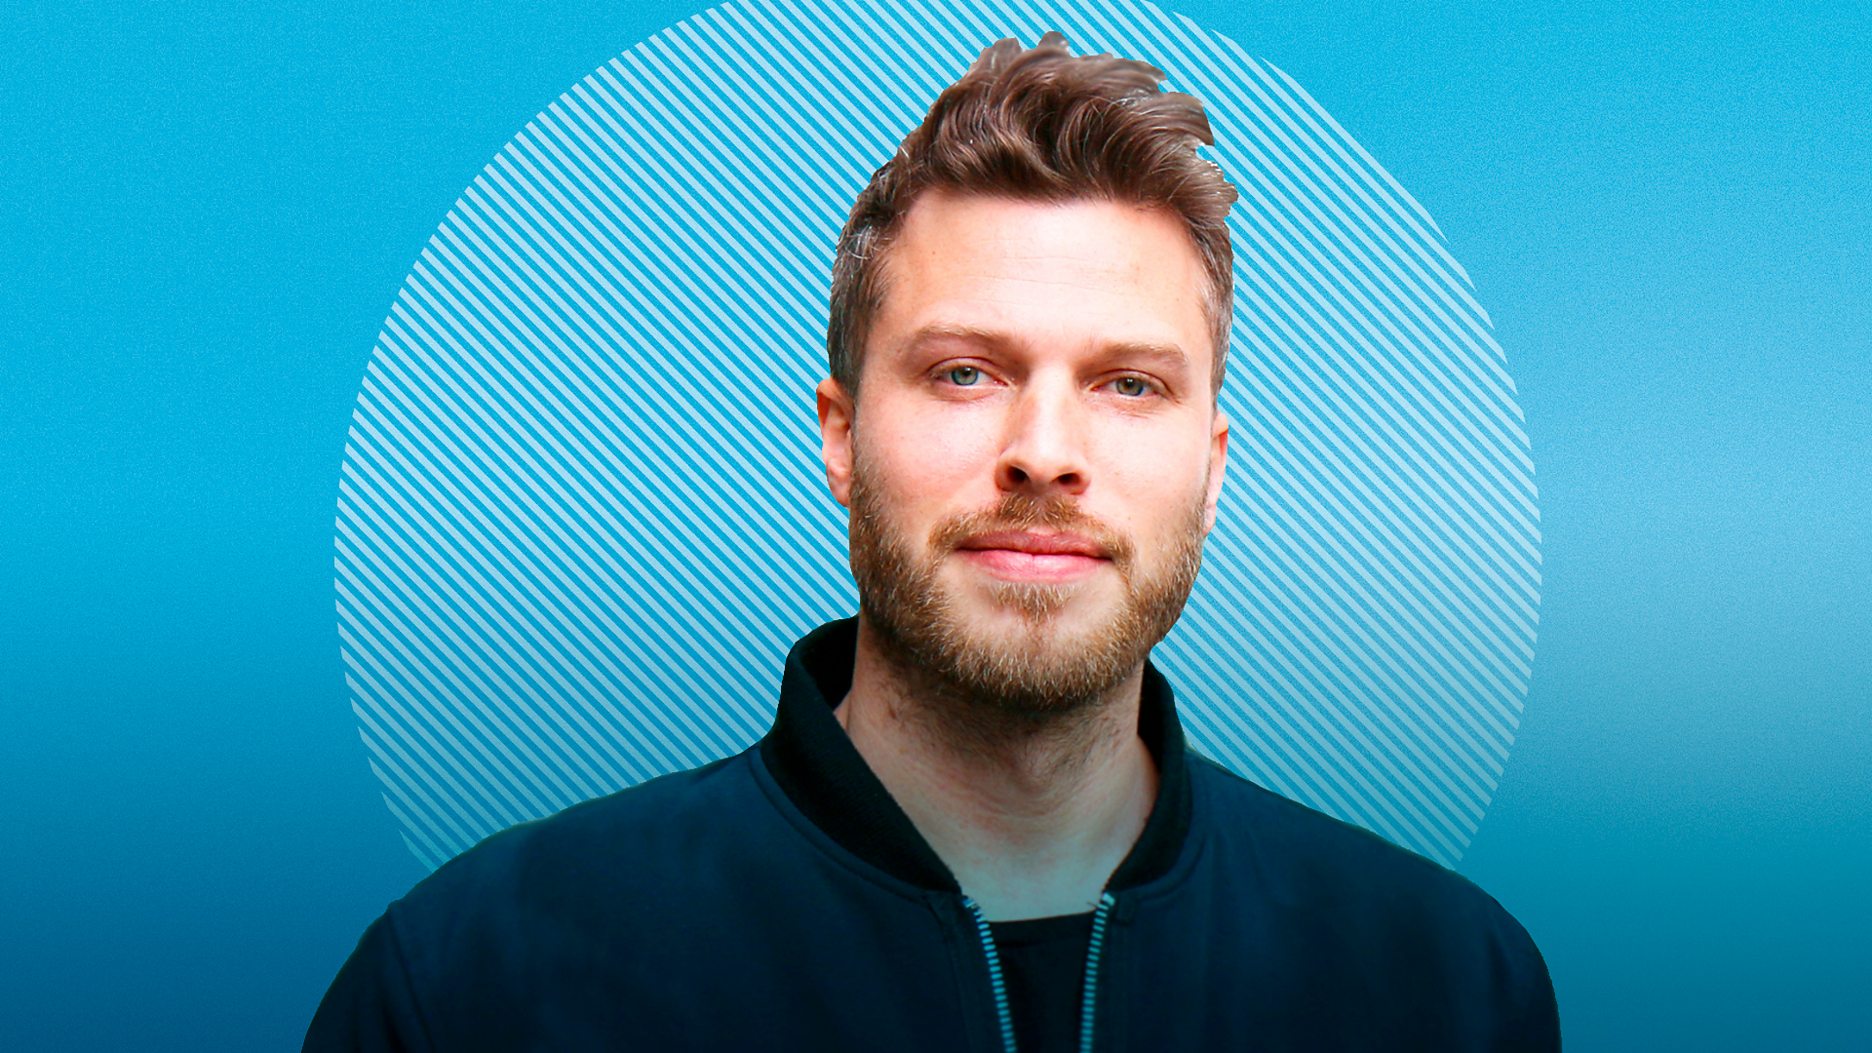 BBC Radio 5 Live announce Rick Edwards as the new presenter of Fighting Talk